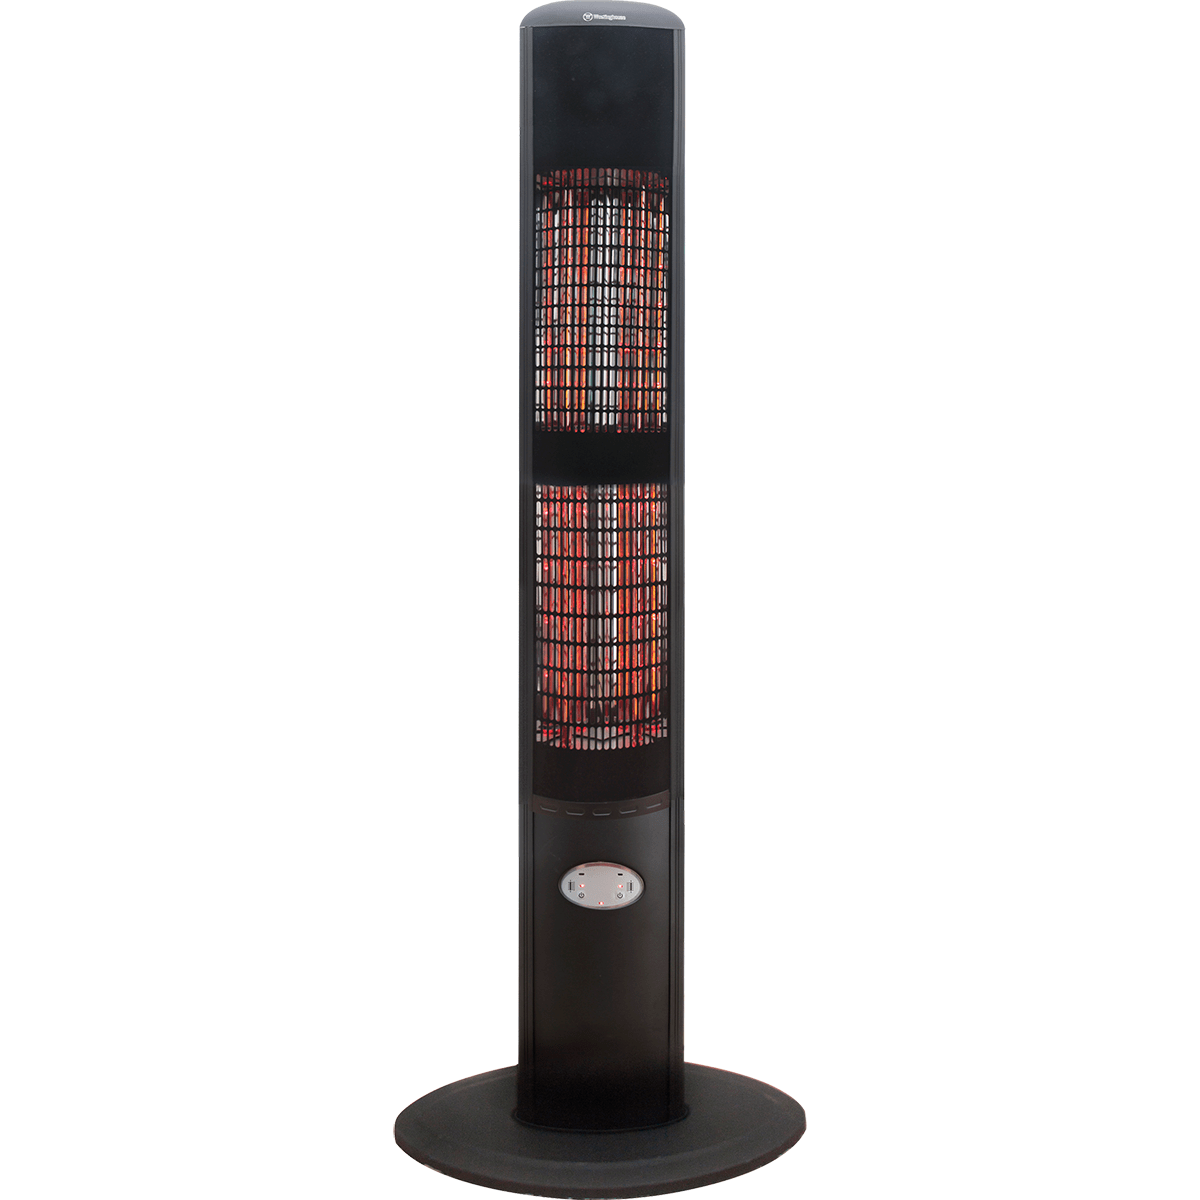 Ener-G+ Carbon Infrared Outdoor Patio Heater w/ Remote